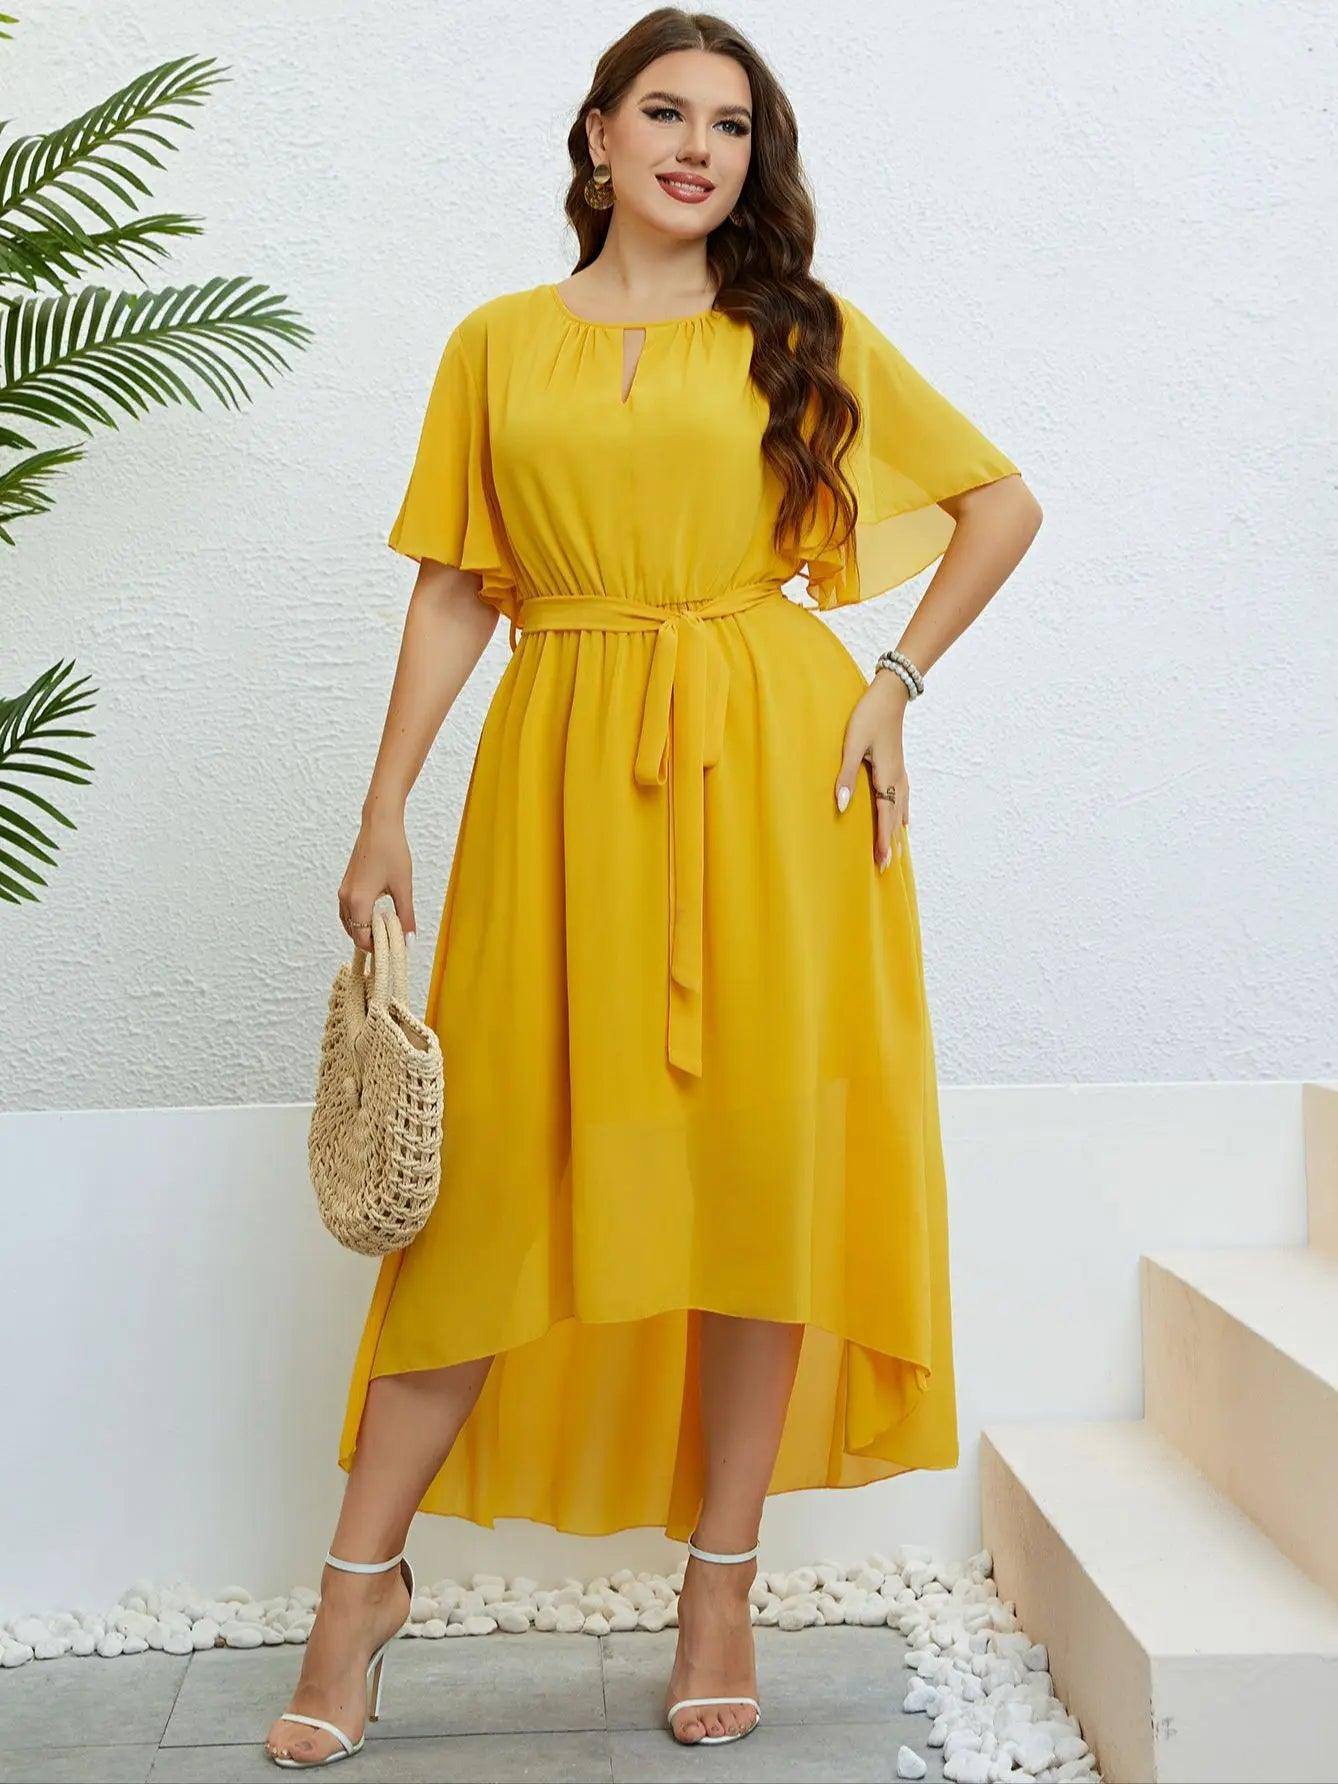 Chiffon Party Dresses For Women Plus Size Summer Solid Color-Yellow-7